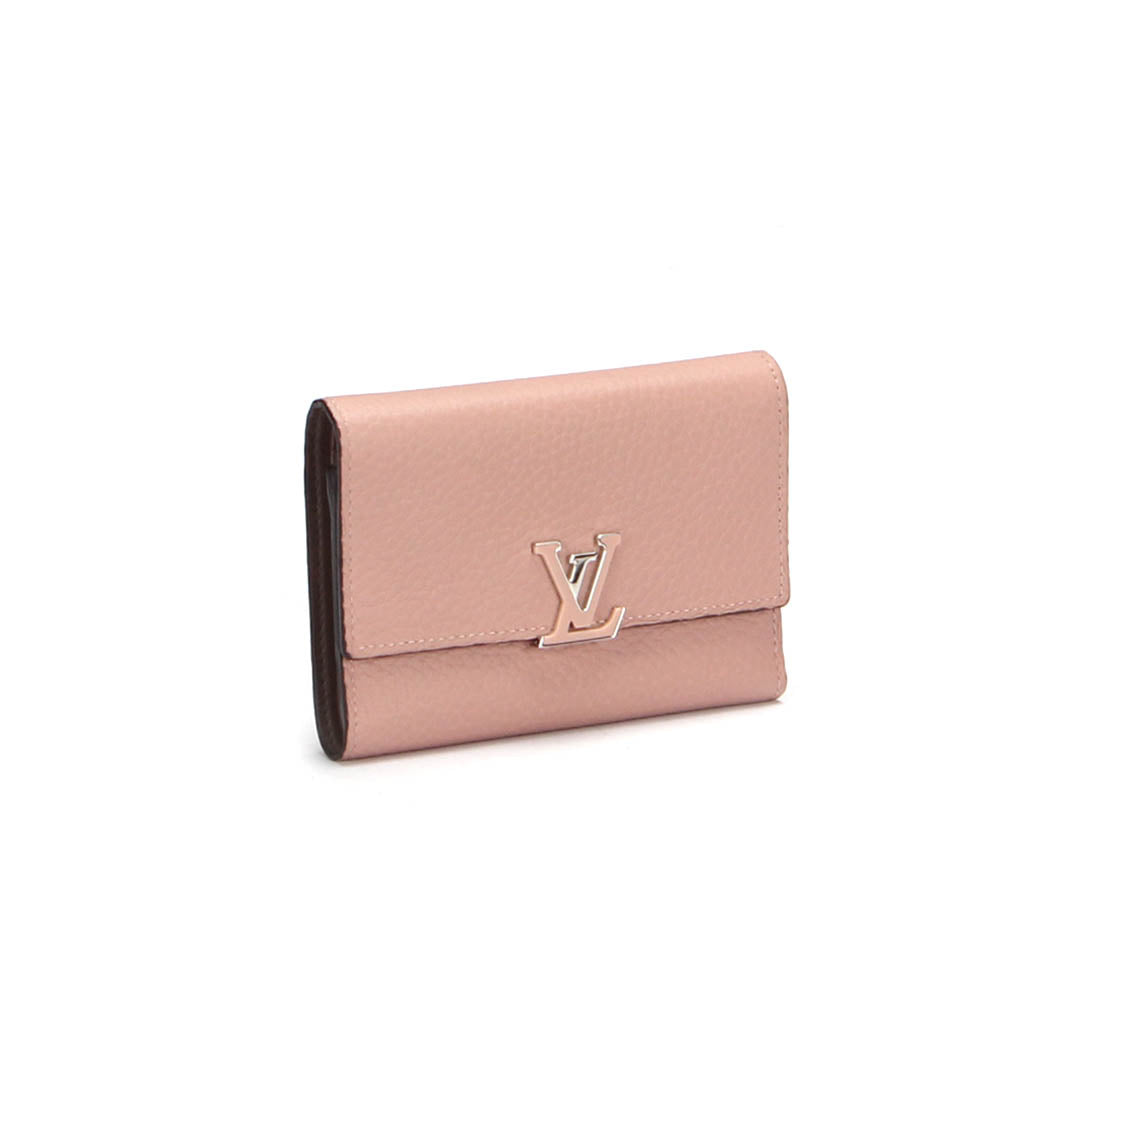 Taurillon Capucines Compact Wallet M62156 – LuxUness